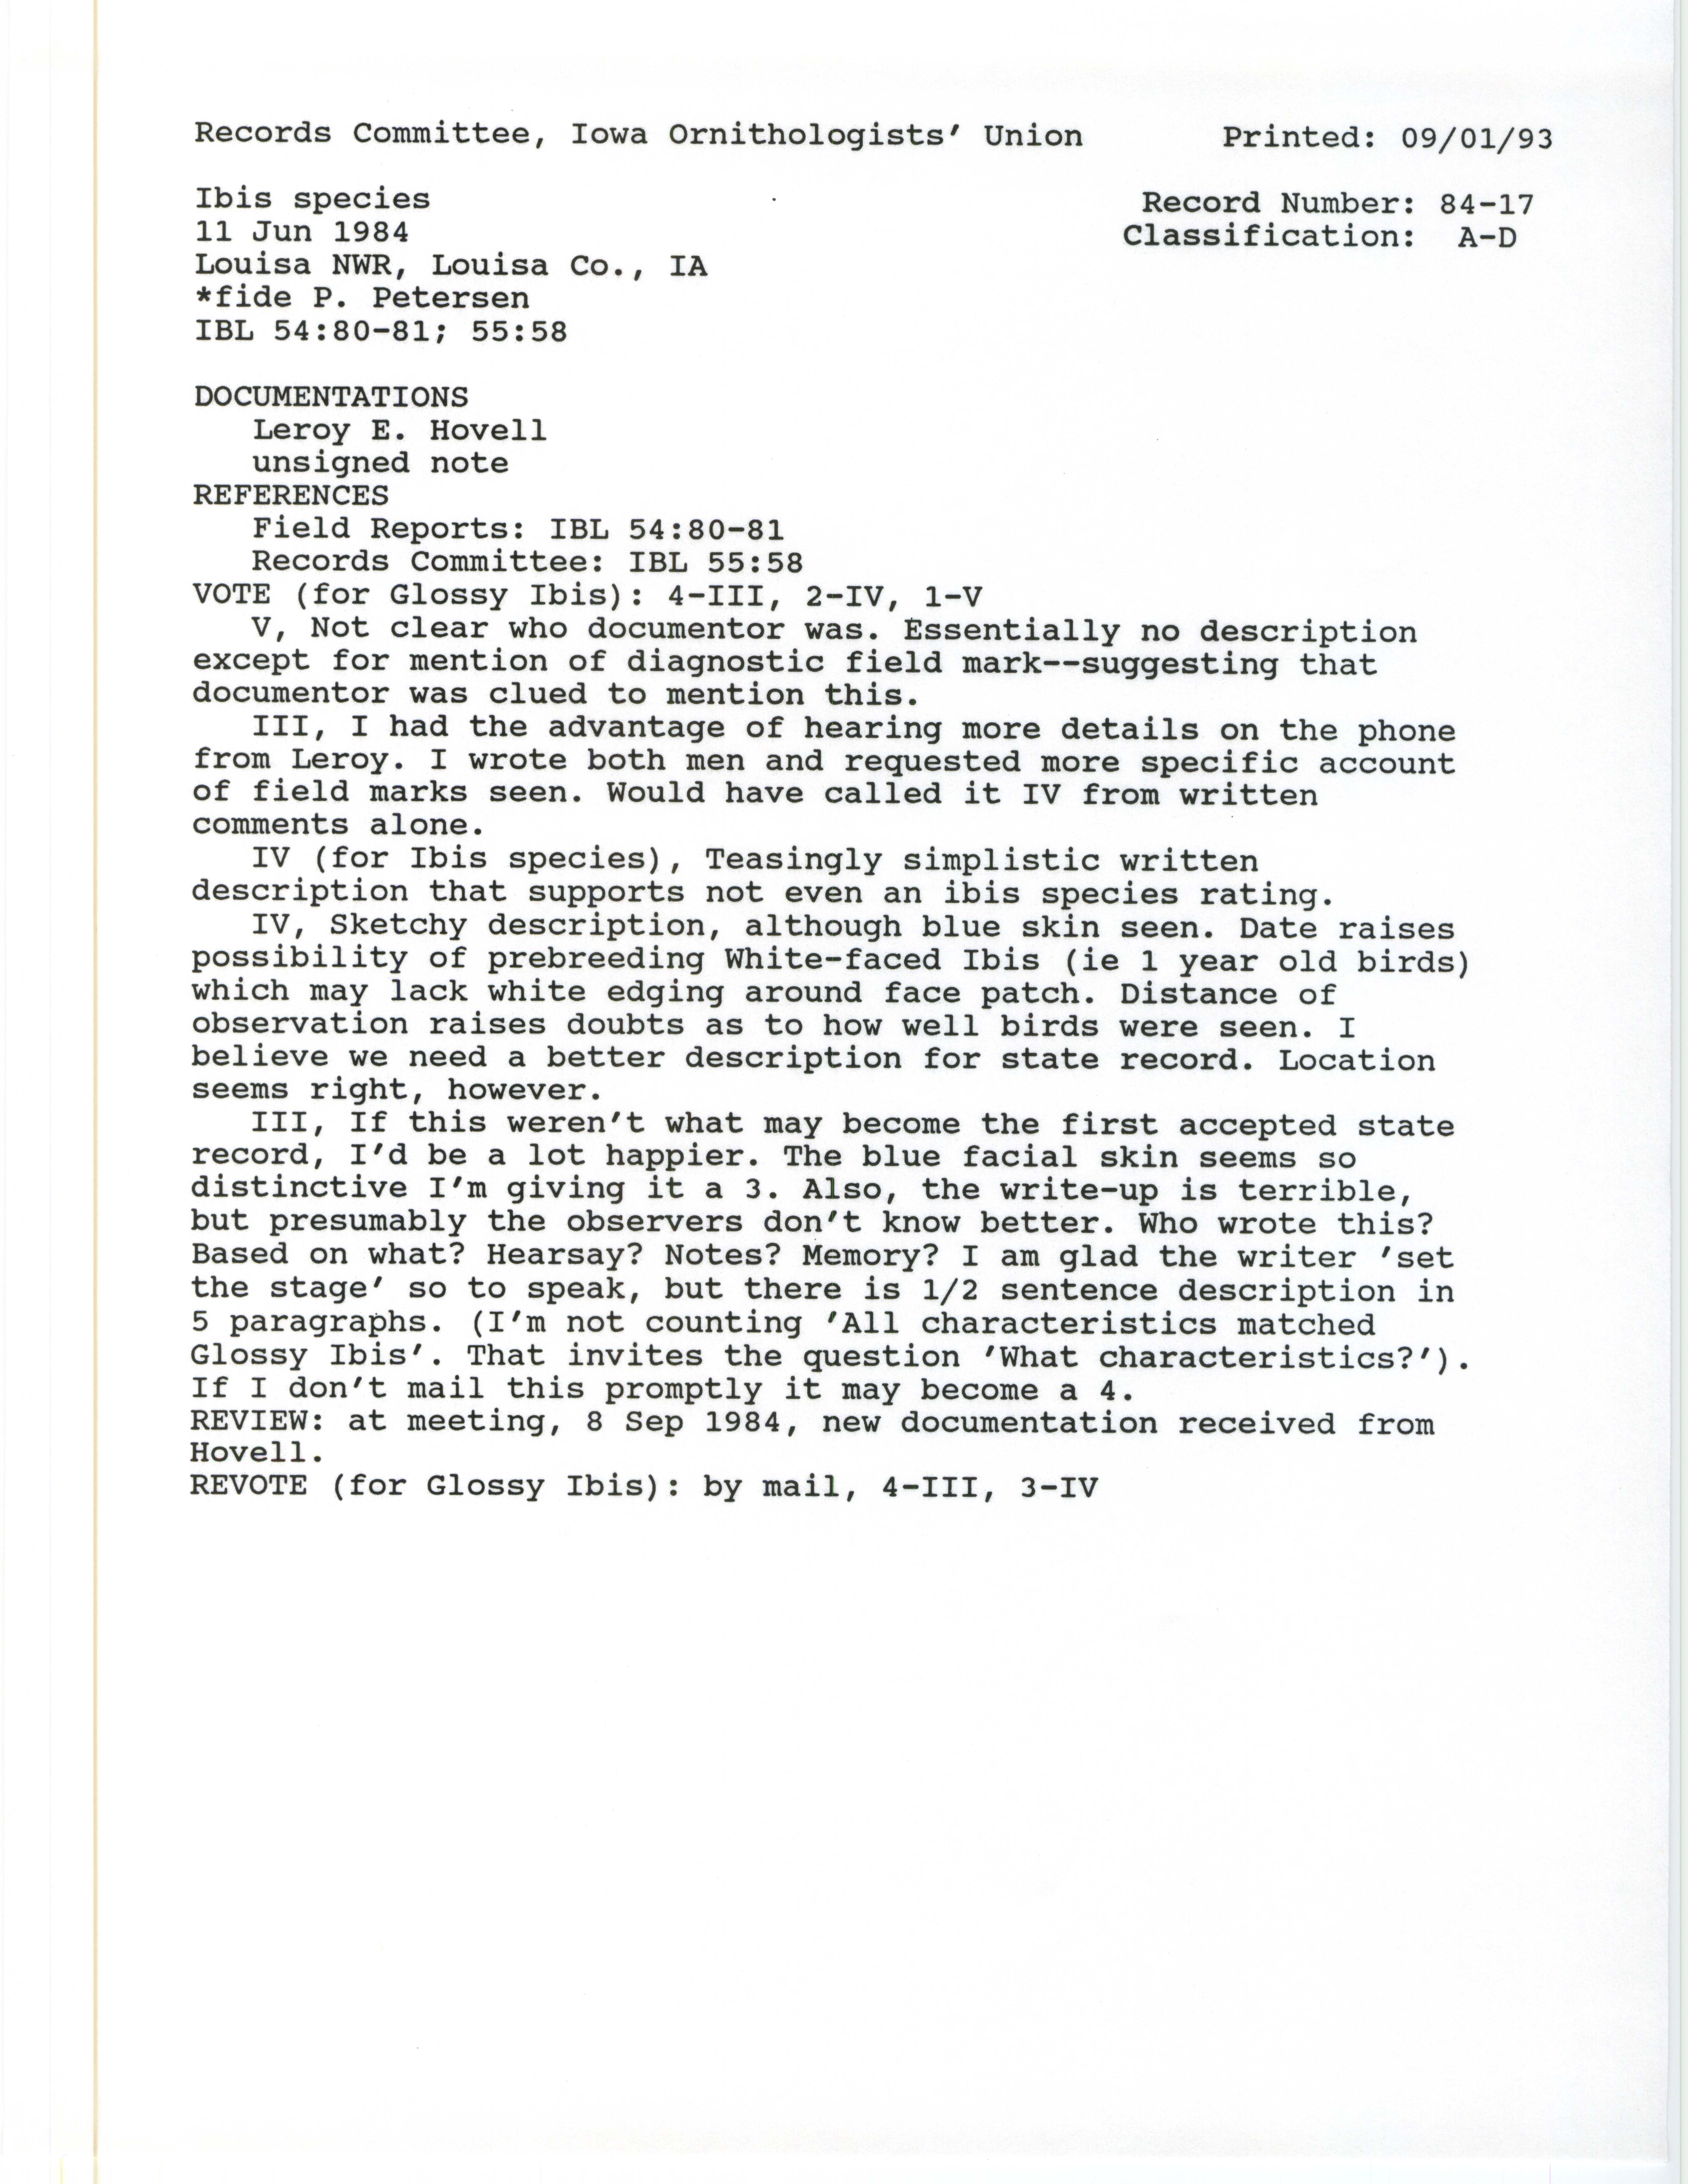 Records Committee review for rare bird sighting of Ibis species at Louisa National Wildlife Refuge, 1984